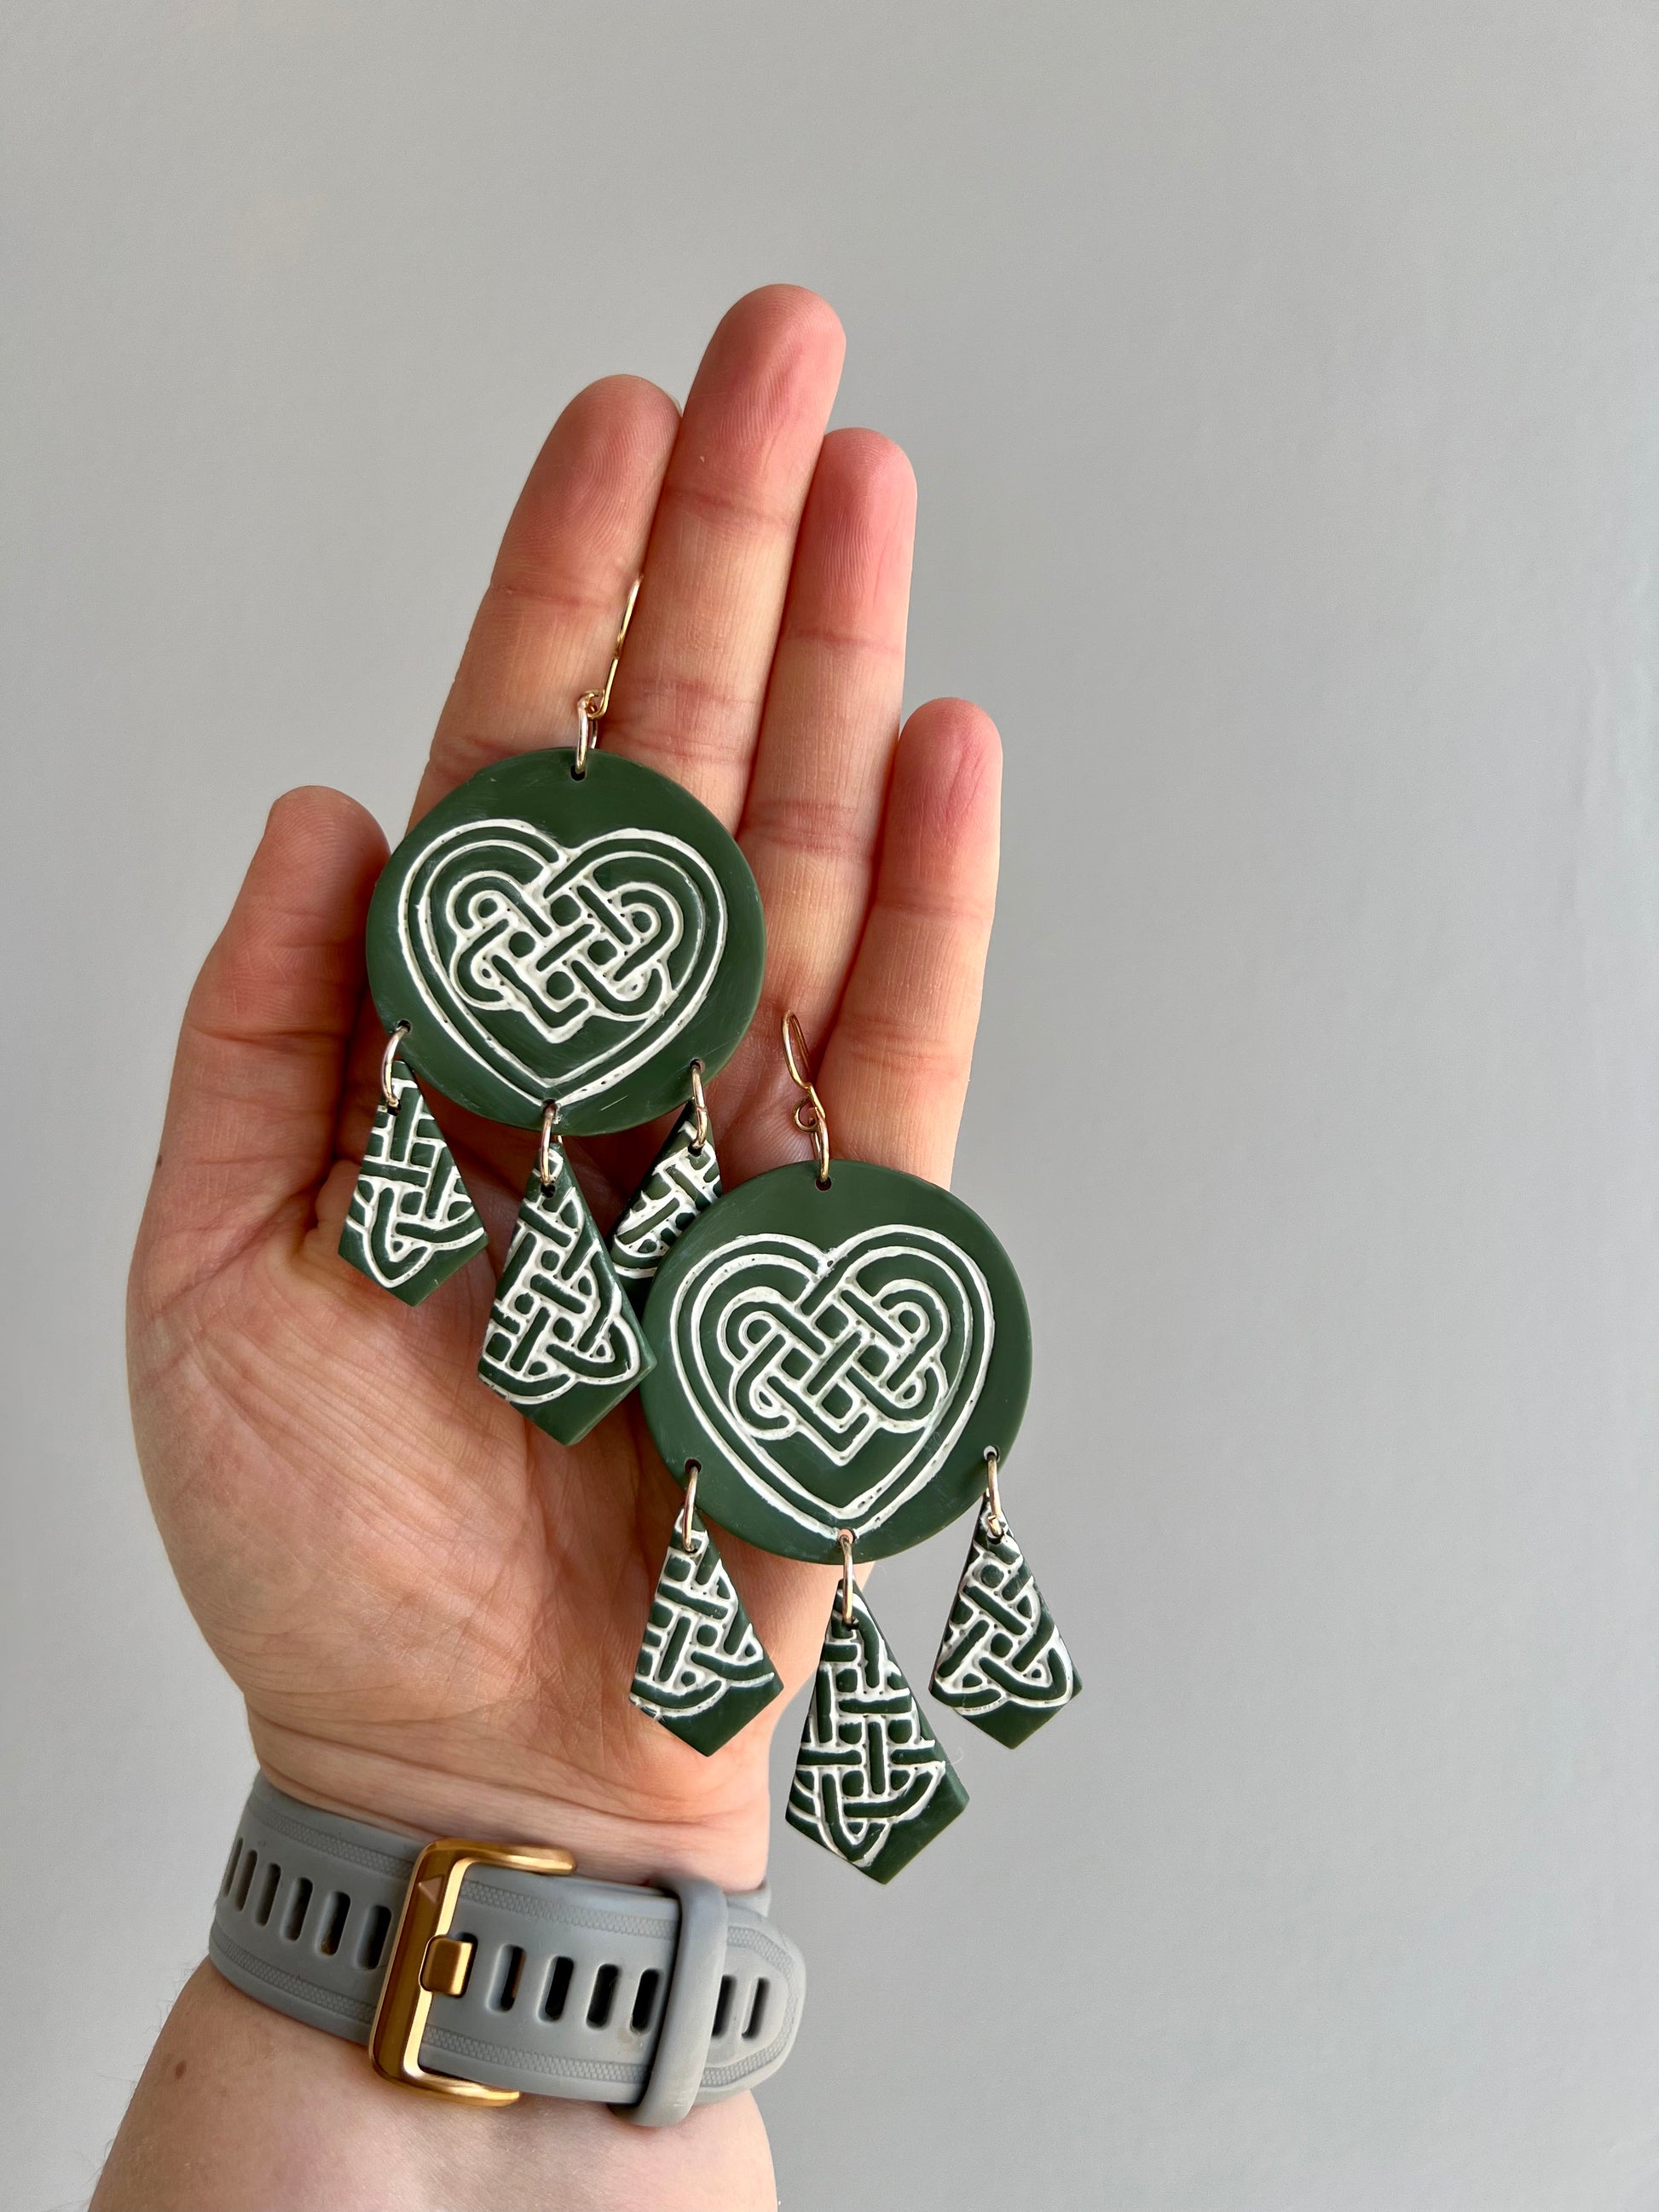 Enhance your style with our stunning green Celtic love knot polymer clay earrings. These intricately crafted accessories embody the timeless symbolism of eternal love and unity. Complete your look with these elegant statement pieces, perfect for any occasion.